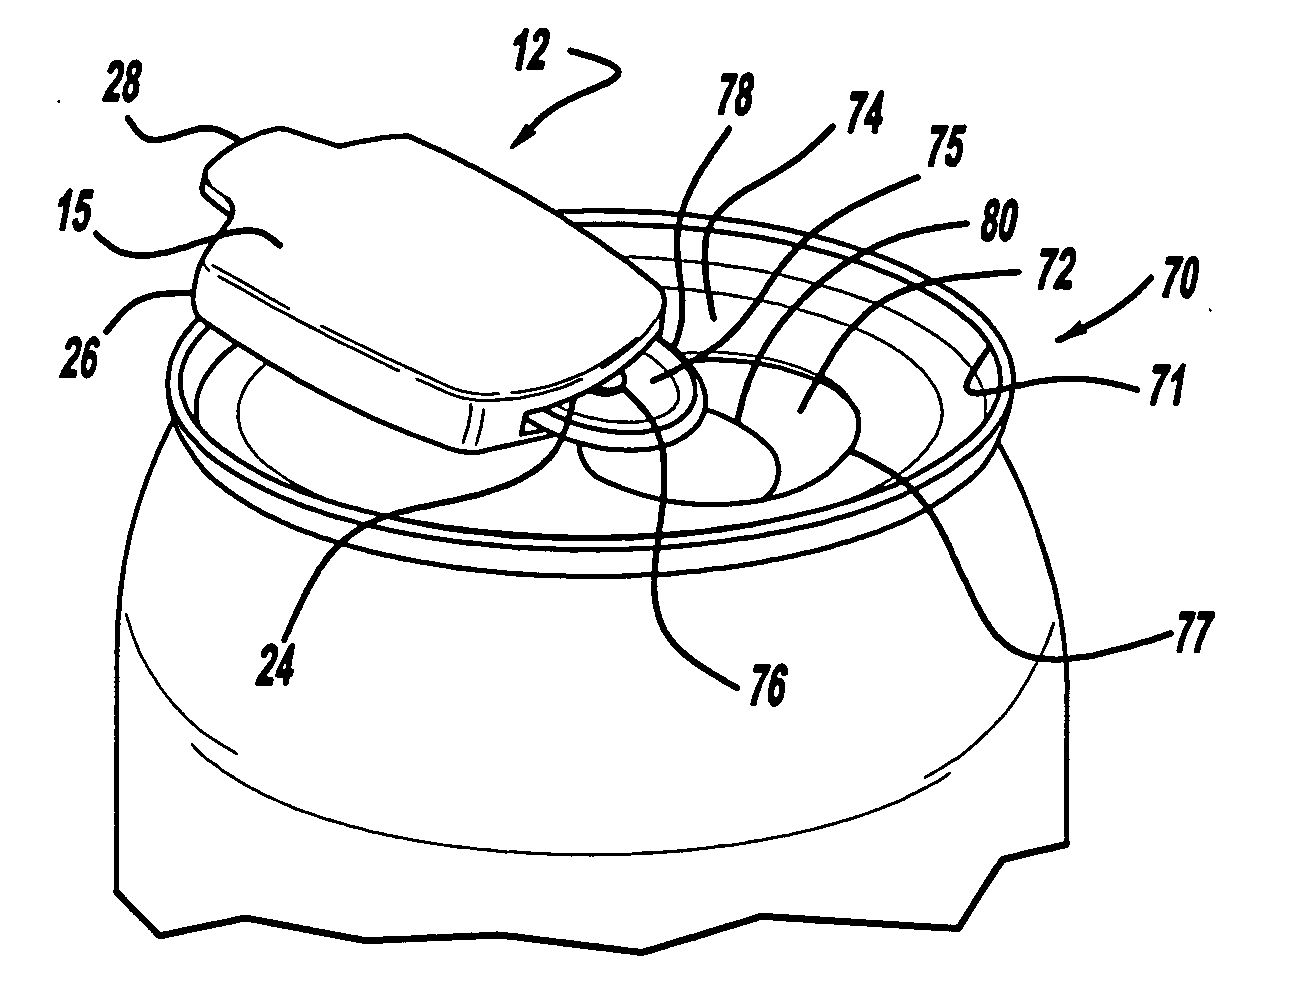 Ring-tab extending sleeve for easy opening and re-closing the opening of a beverage container